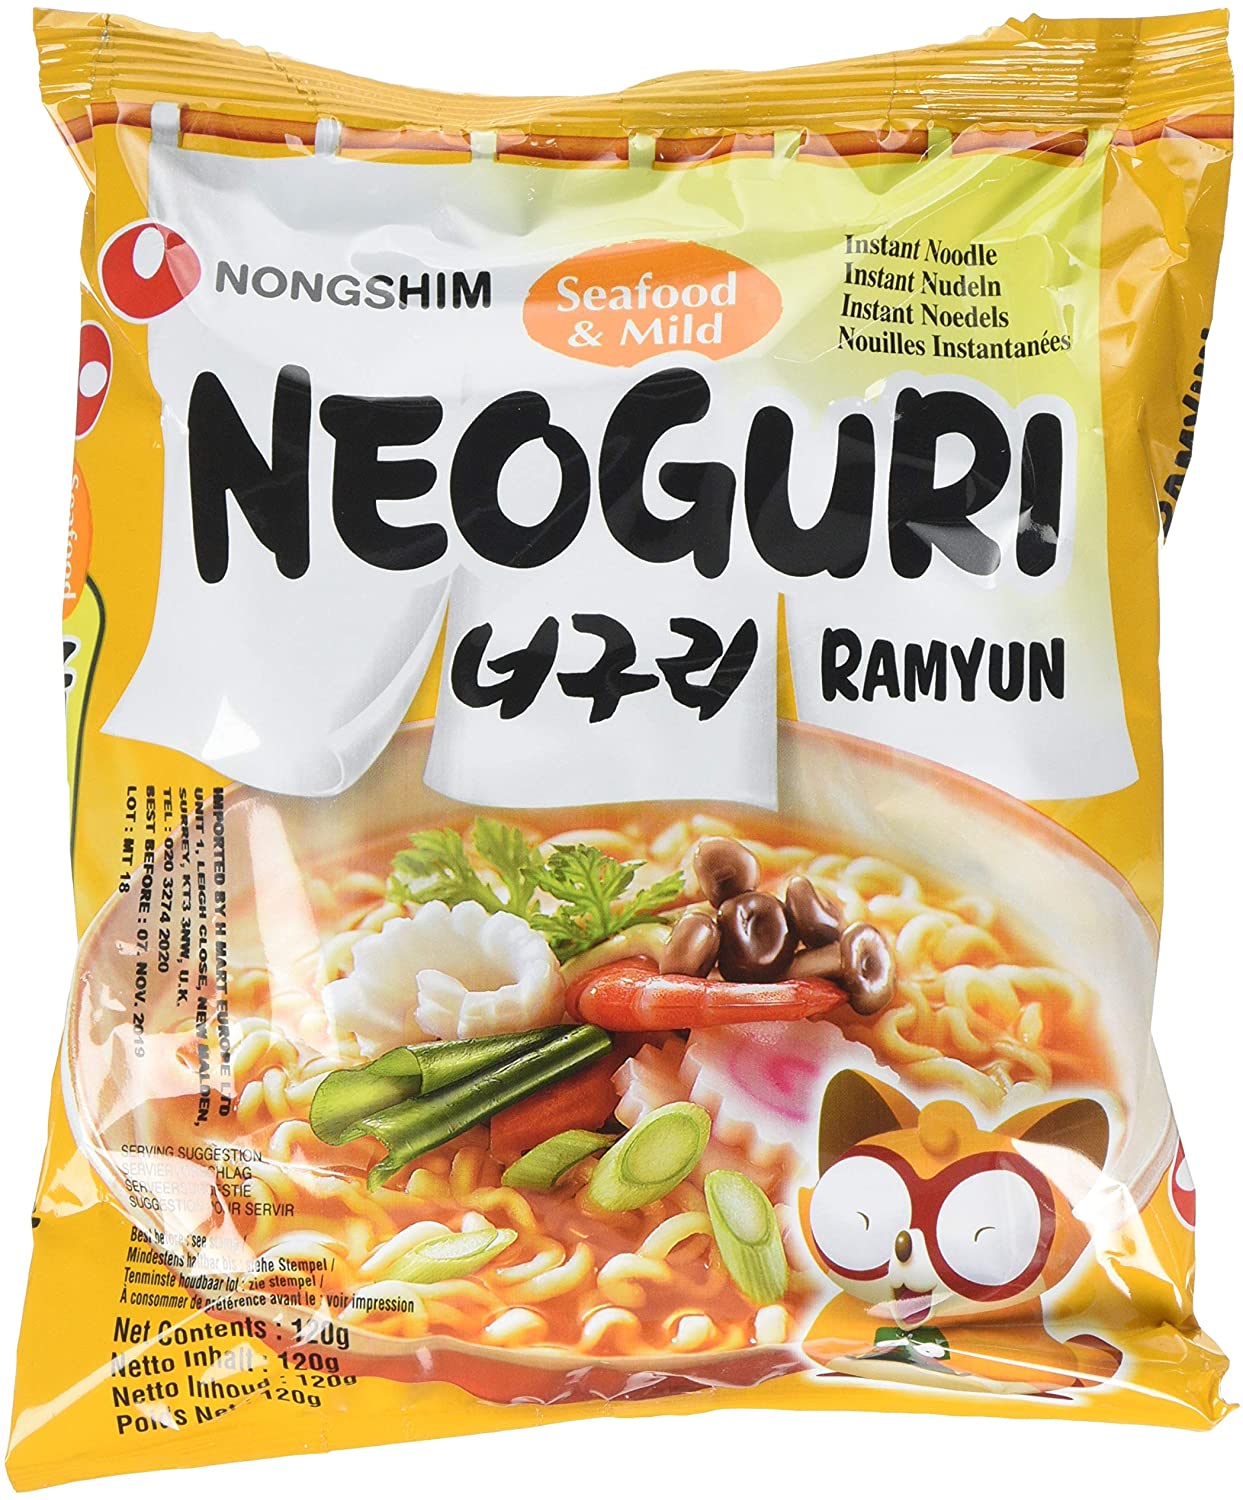 Neoguri Seafood and Mild Instant Noodles Ramyun 120g by Nongshim